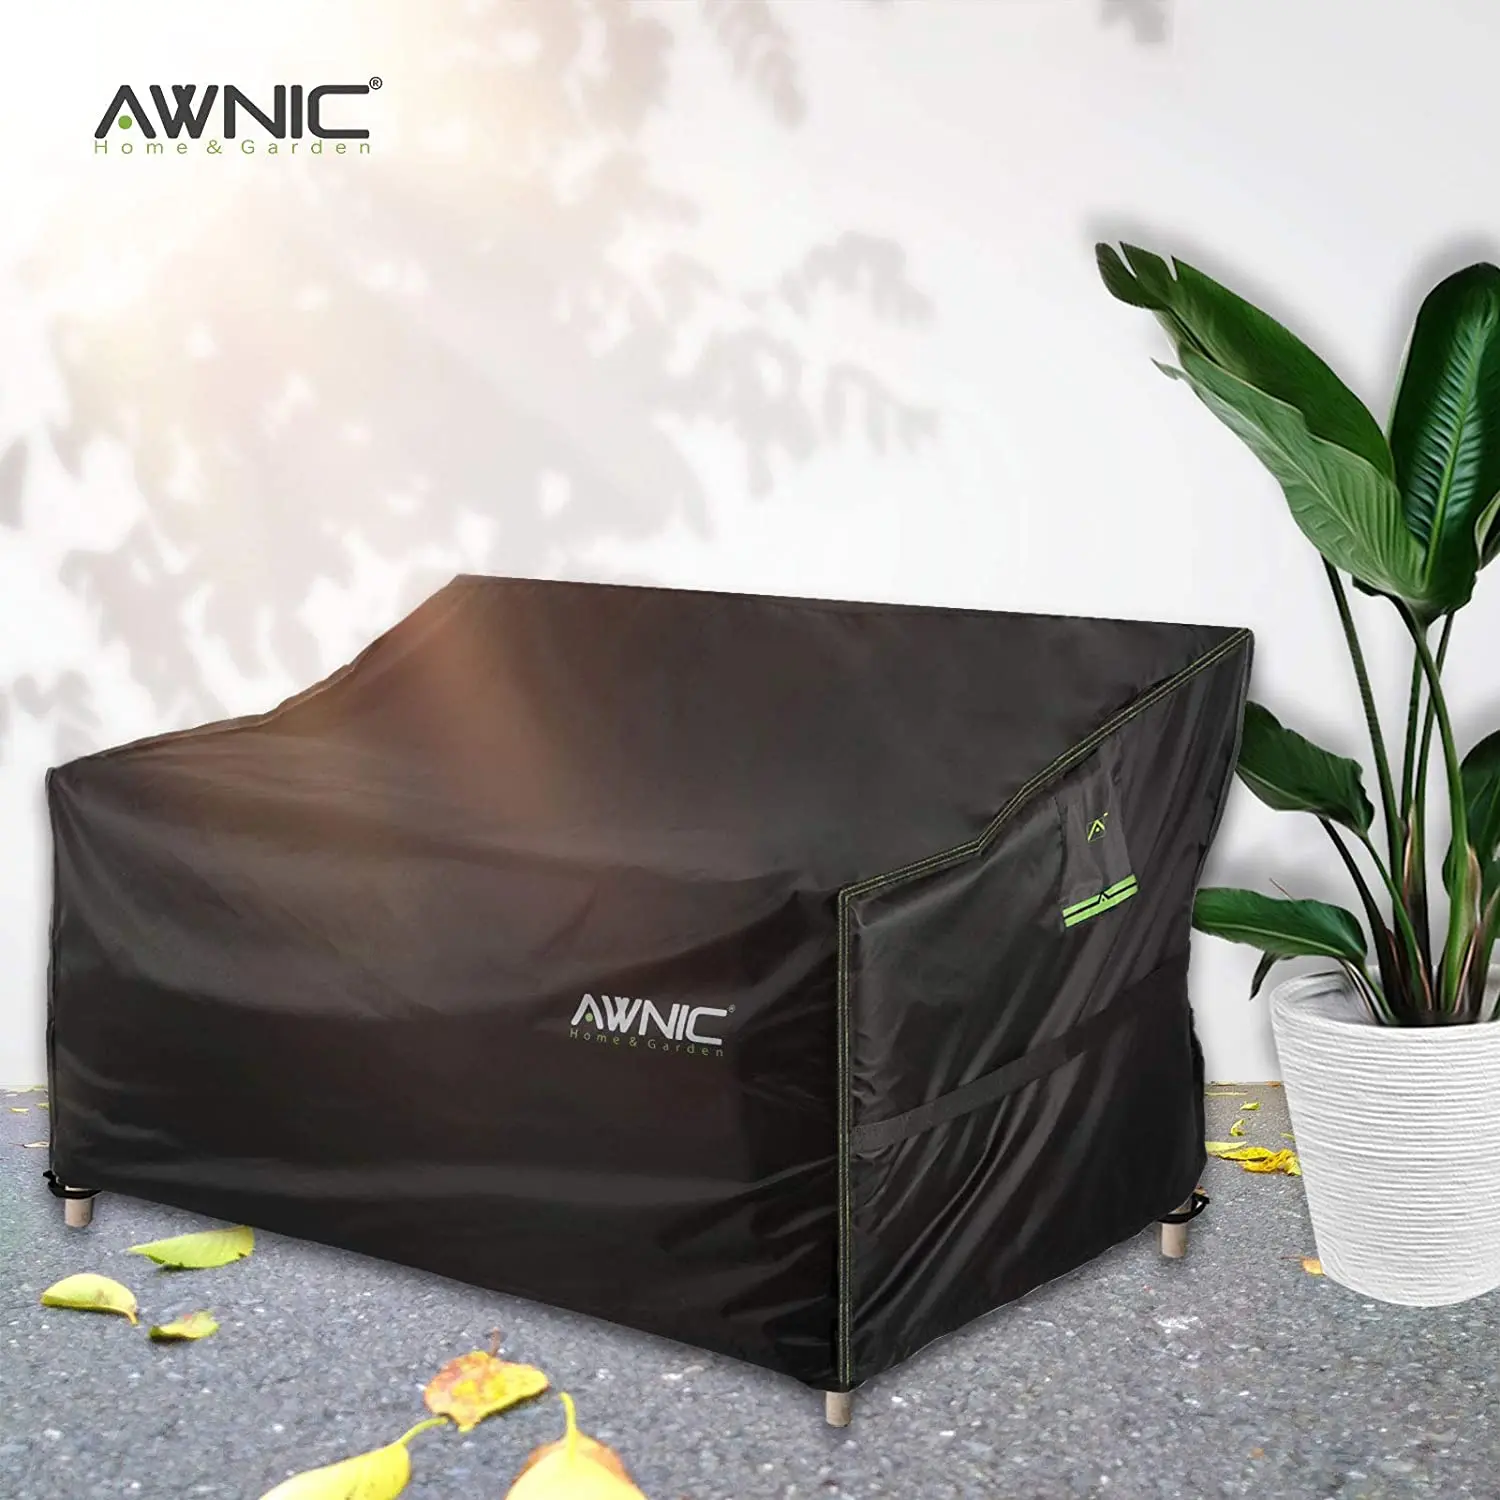 AWNIC 3 Seater Bench Cover for Garden Bench Waterproof Tear Resistant 210D 